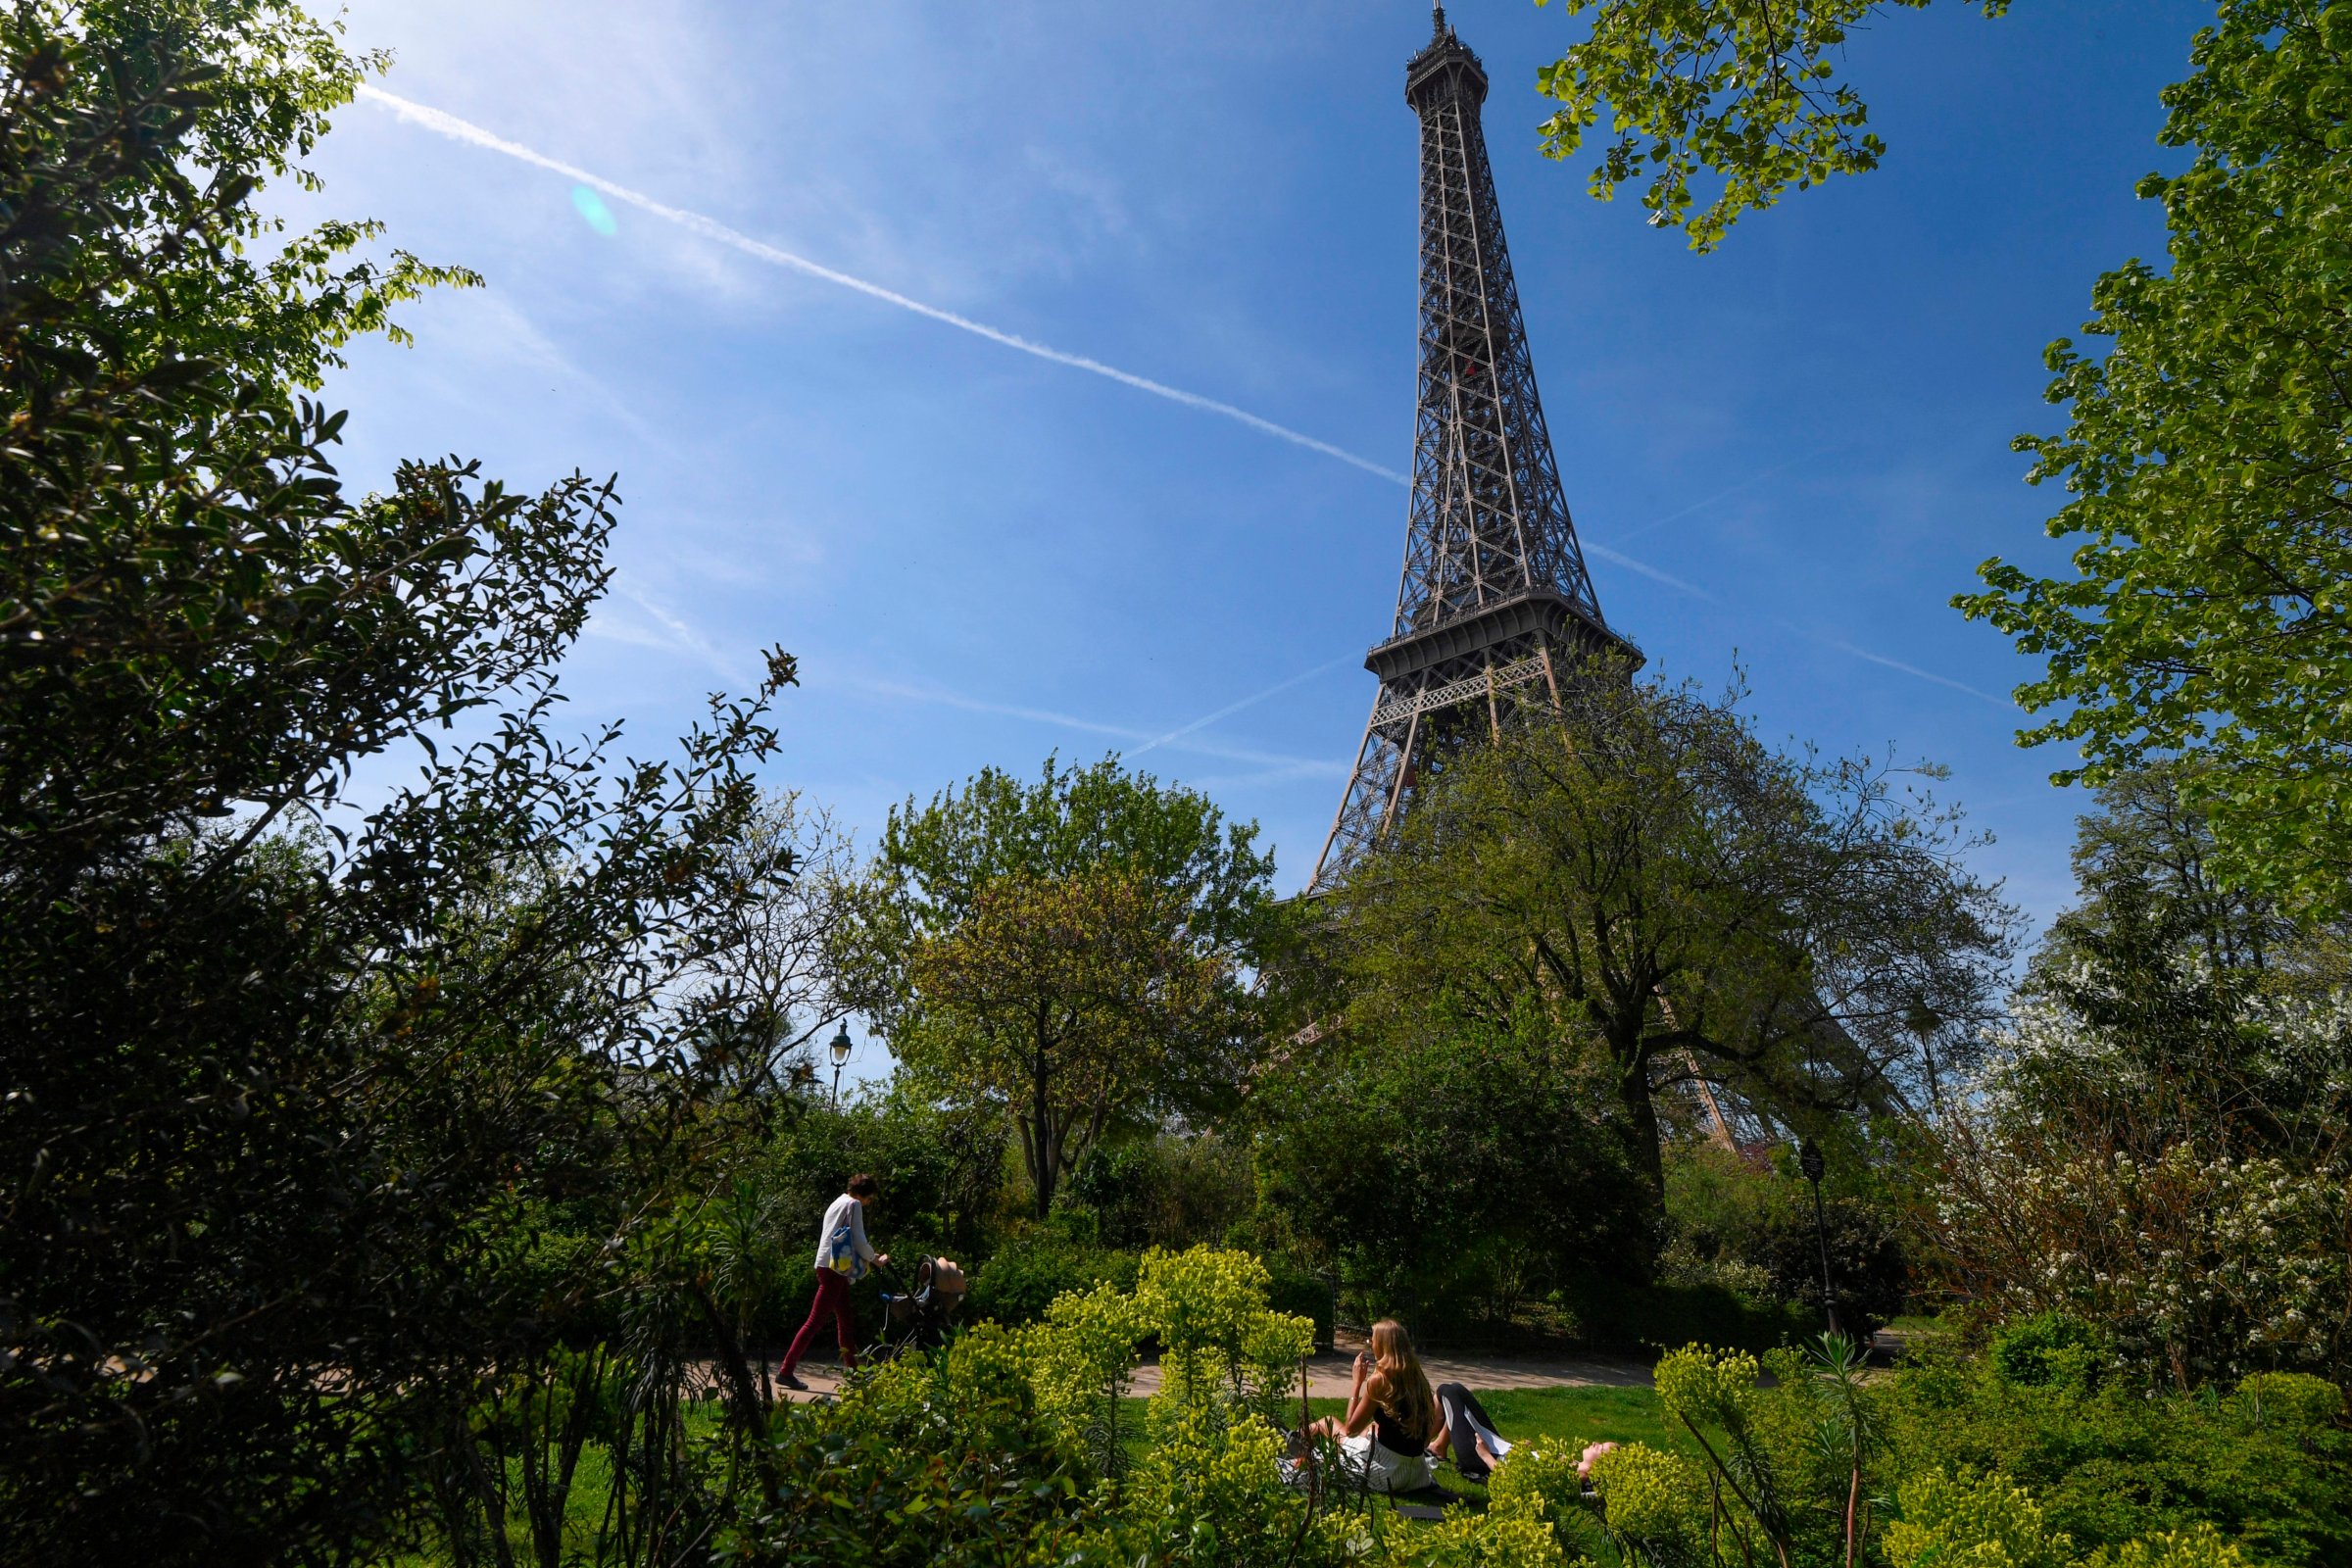 FRANCE-LIFESTYLE-LEISURE-TOURISM-WEATHER-FEATURE